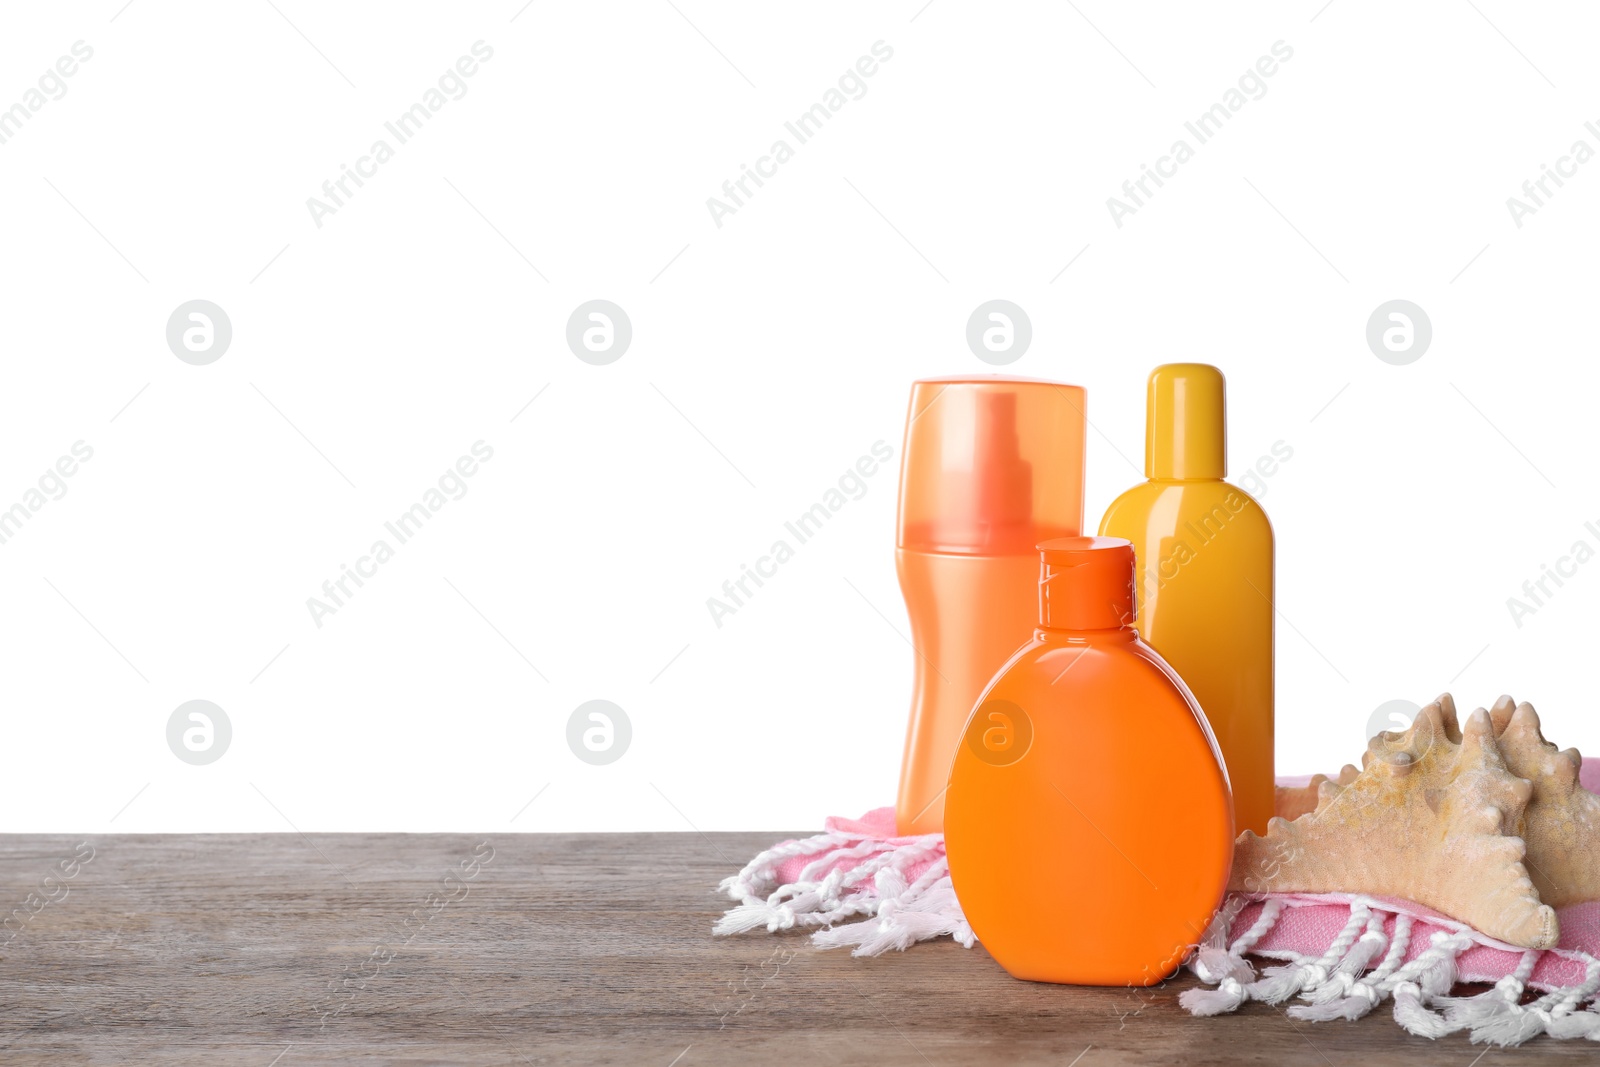 Photo of Sun protection products, beach towel and starfish on wooden table against white background. Space for text